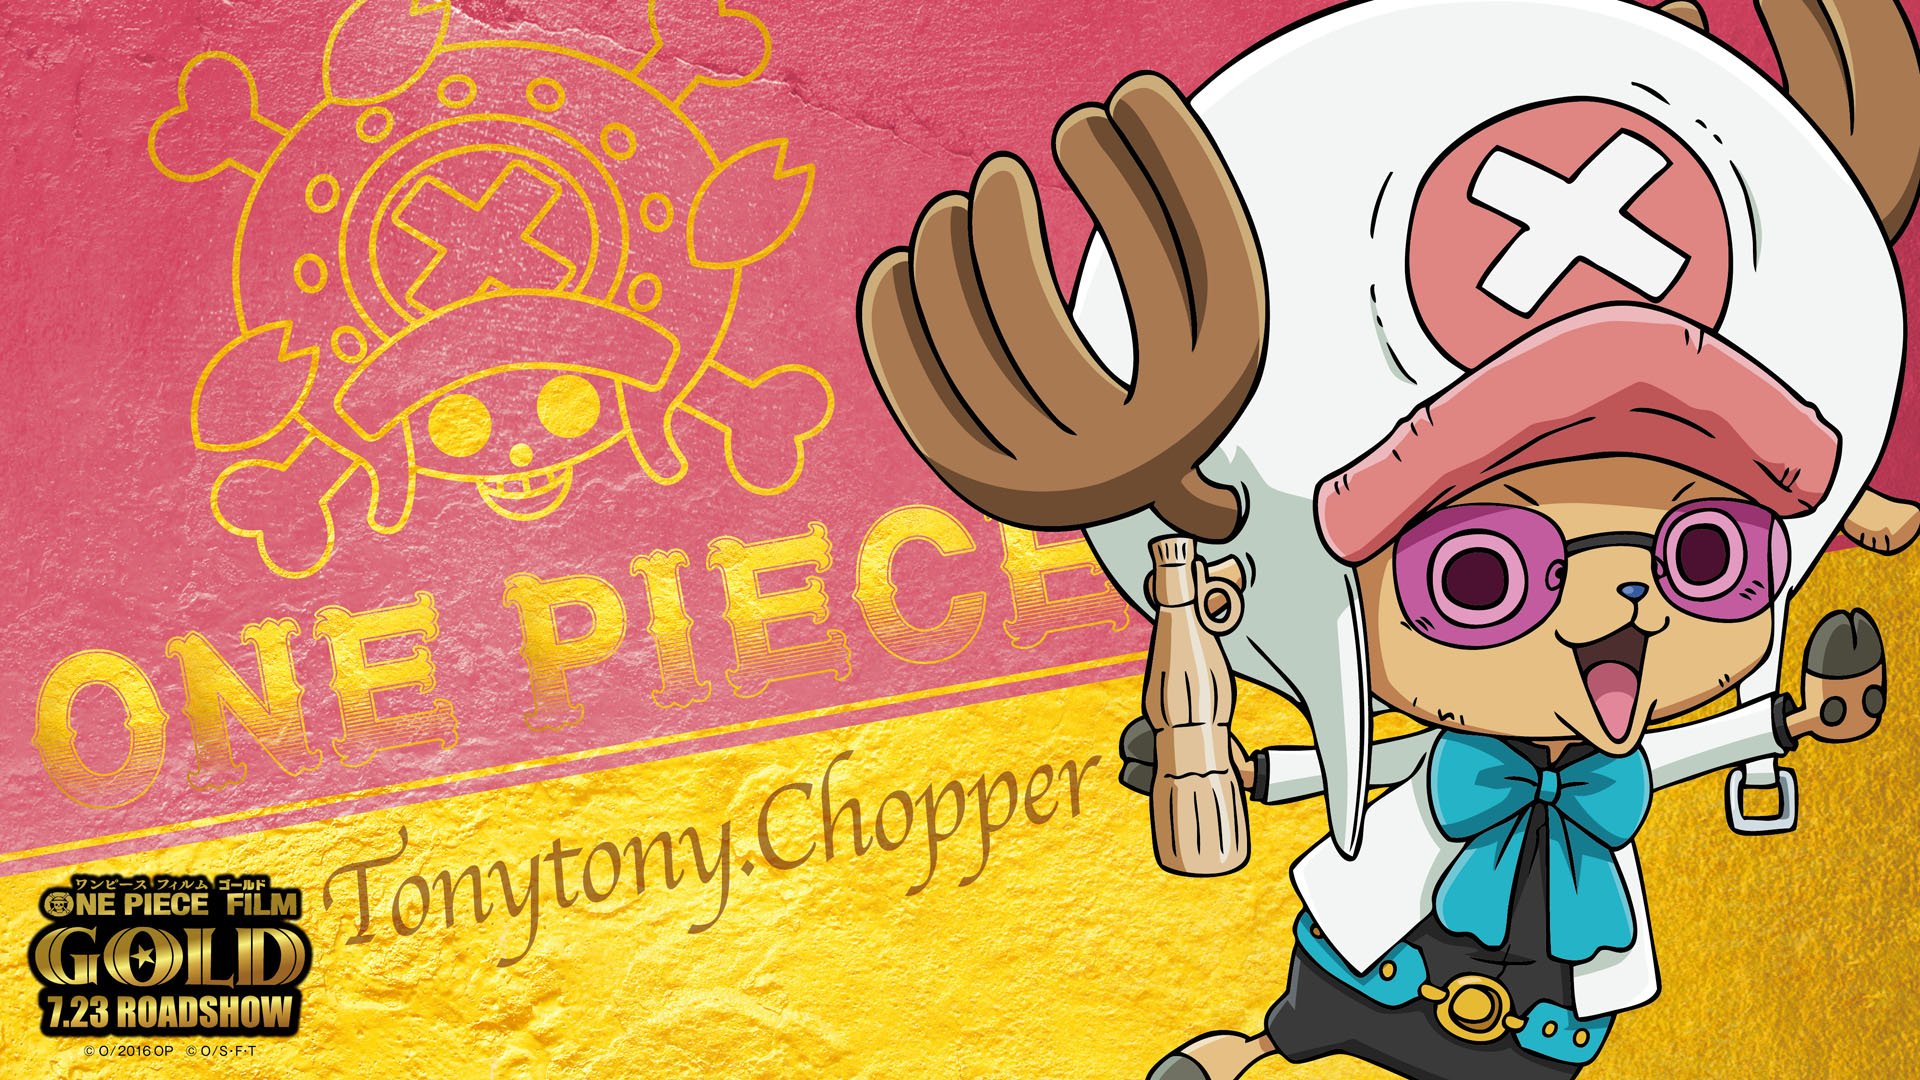 1920x1080 One Piece Wallpaper Background Image. 